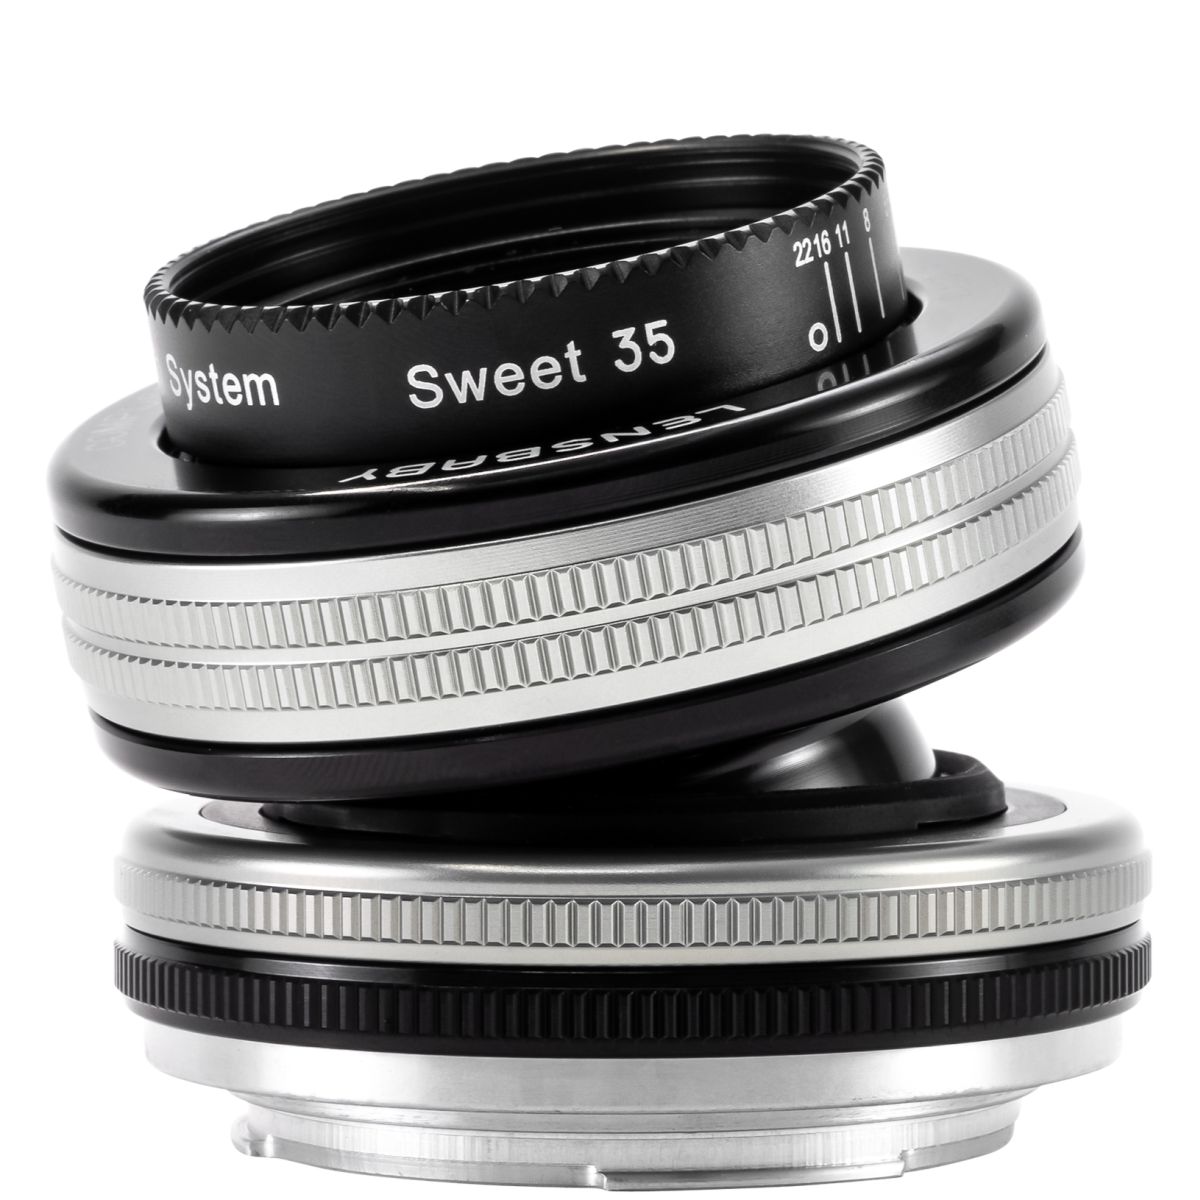 Lensbaby Composer Pro II mit Sweet 35 Canon RF